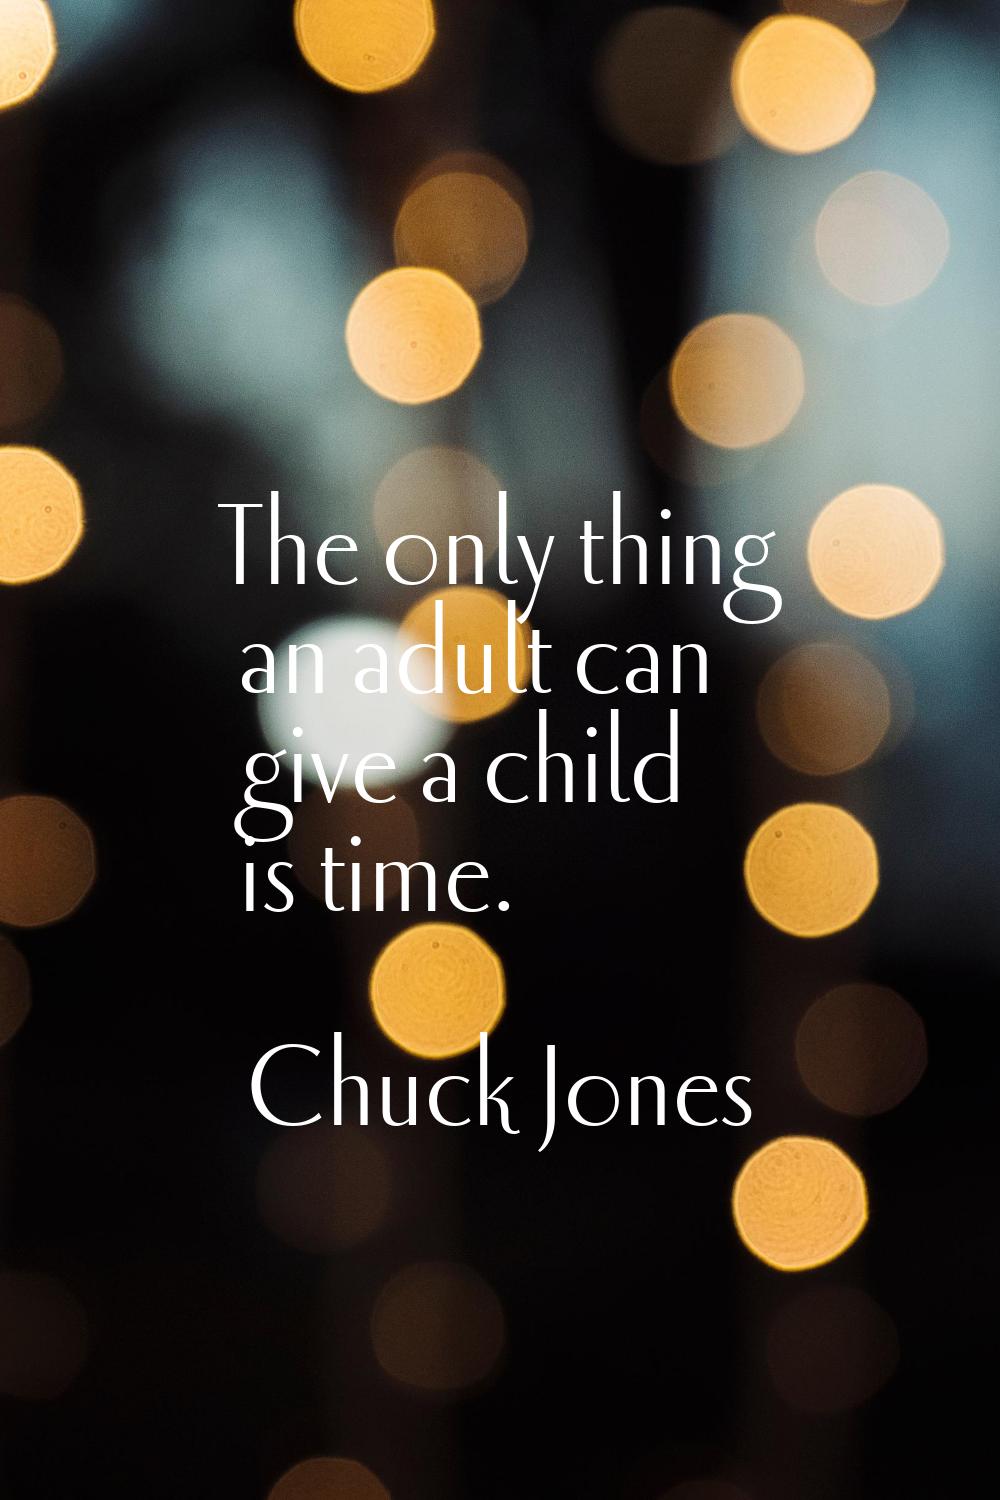 The only thing an adult can give a child is time.